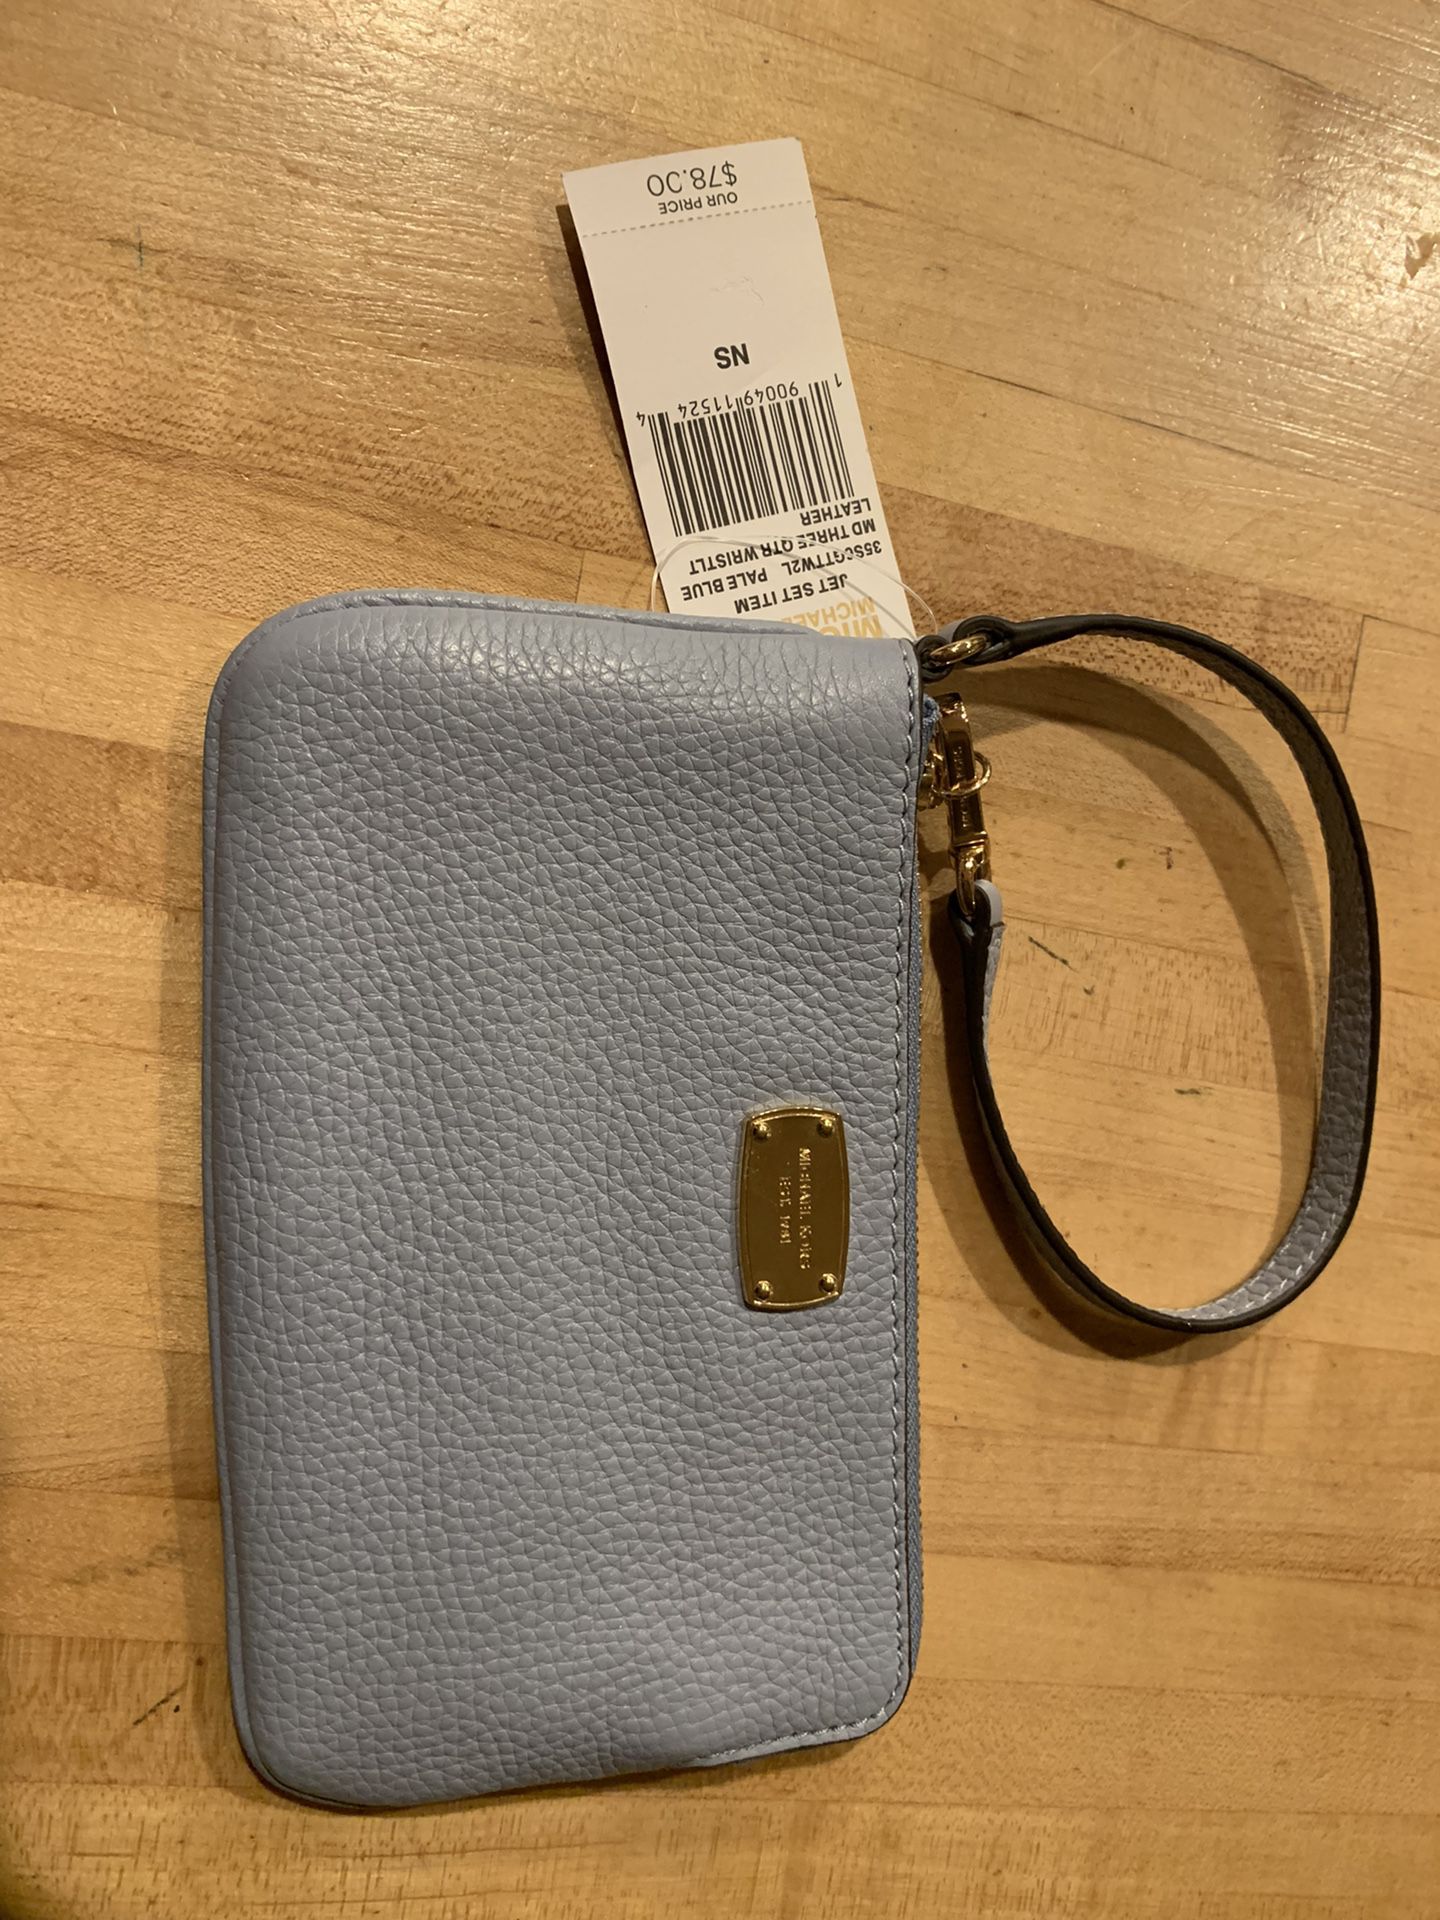 BRAND NEW Marc Jacobs Wallet Purse